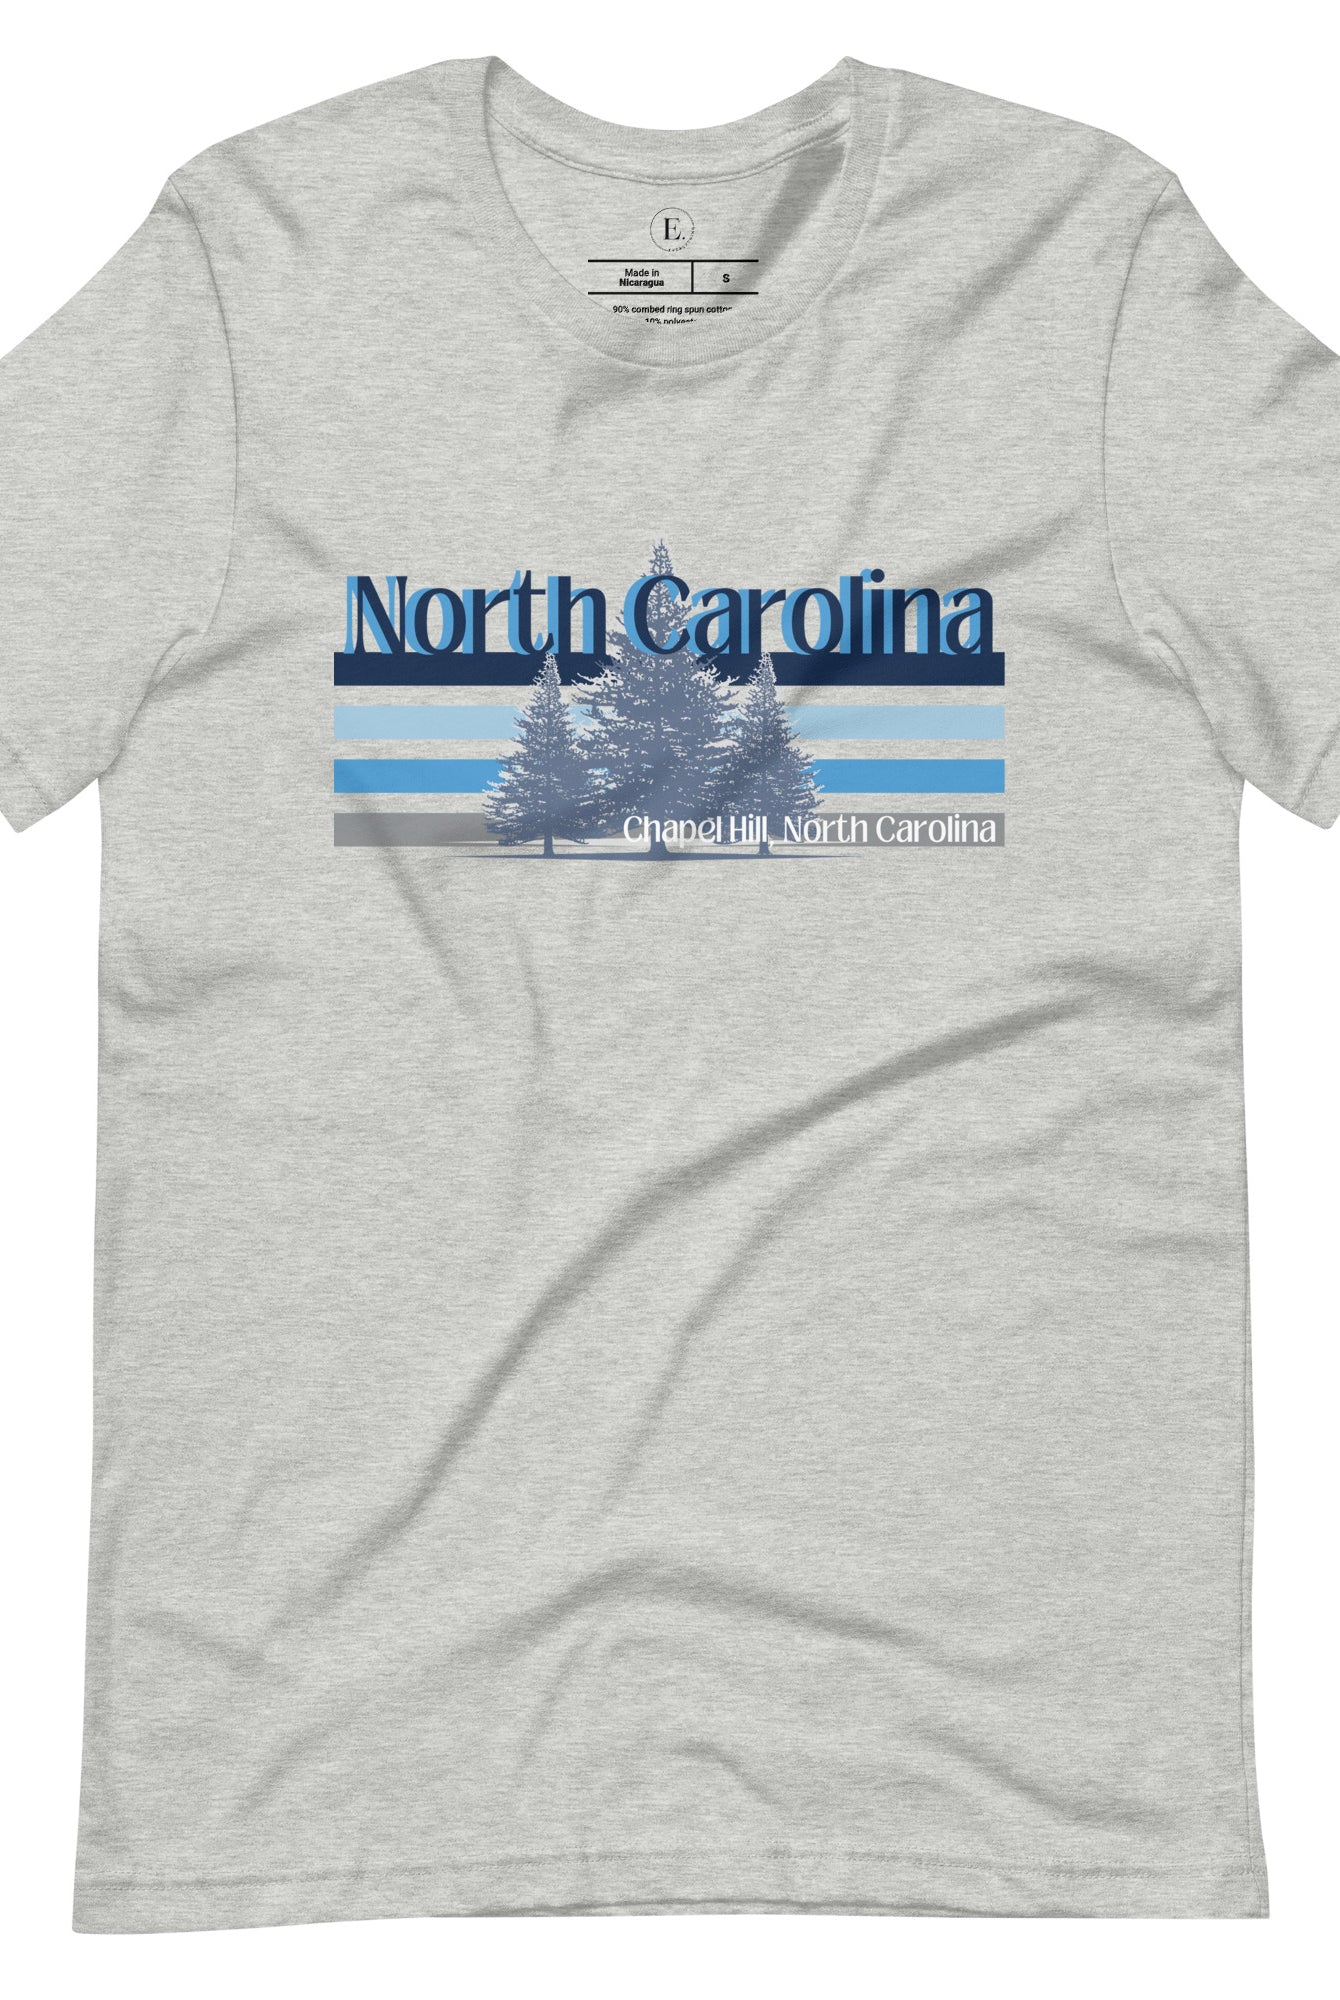 Show your school pride with this iconic North Carolina wordmark t-shirt. Made from premium materials, it features a North Carolina tree line in a the cool Carolina blue colors, representing a tradition of excellence for the nature that North Carolina offers on an athletic heather grey shirt. 